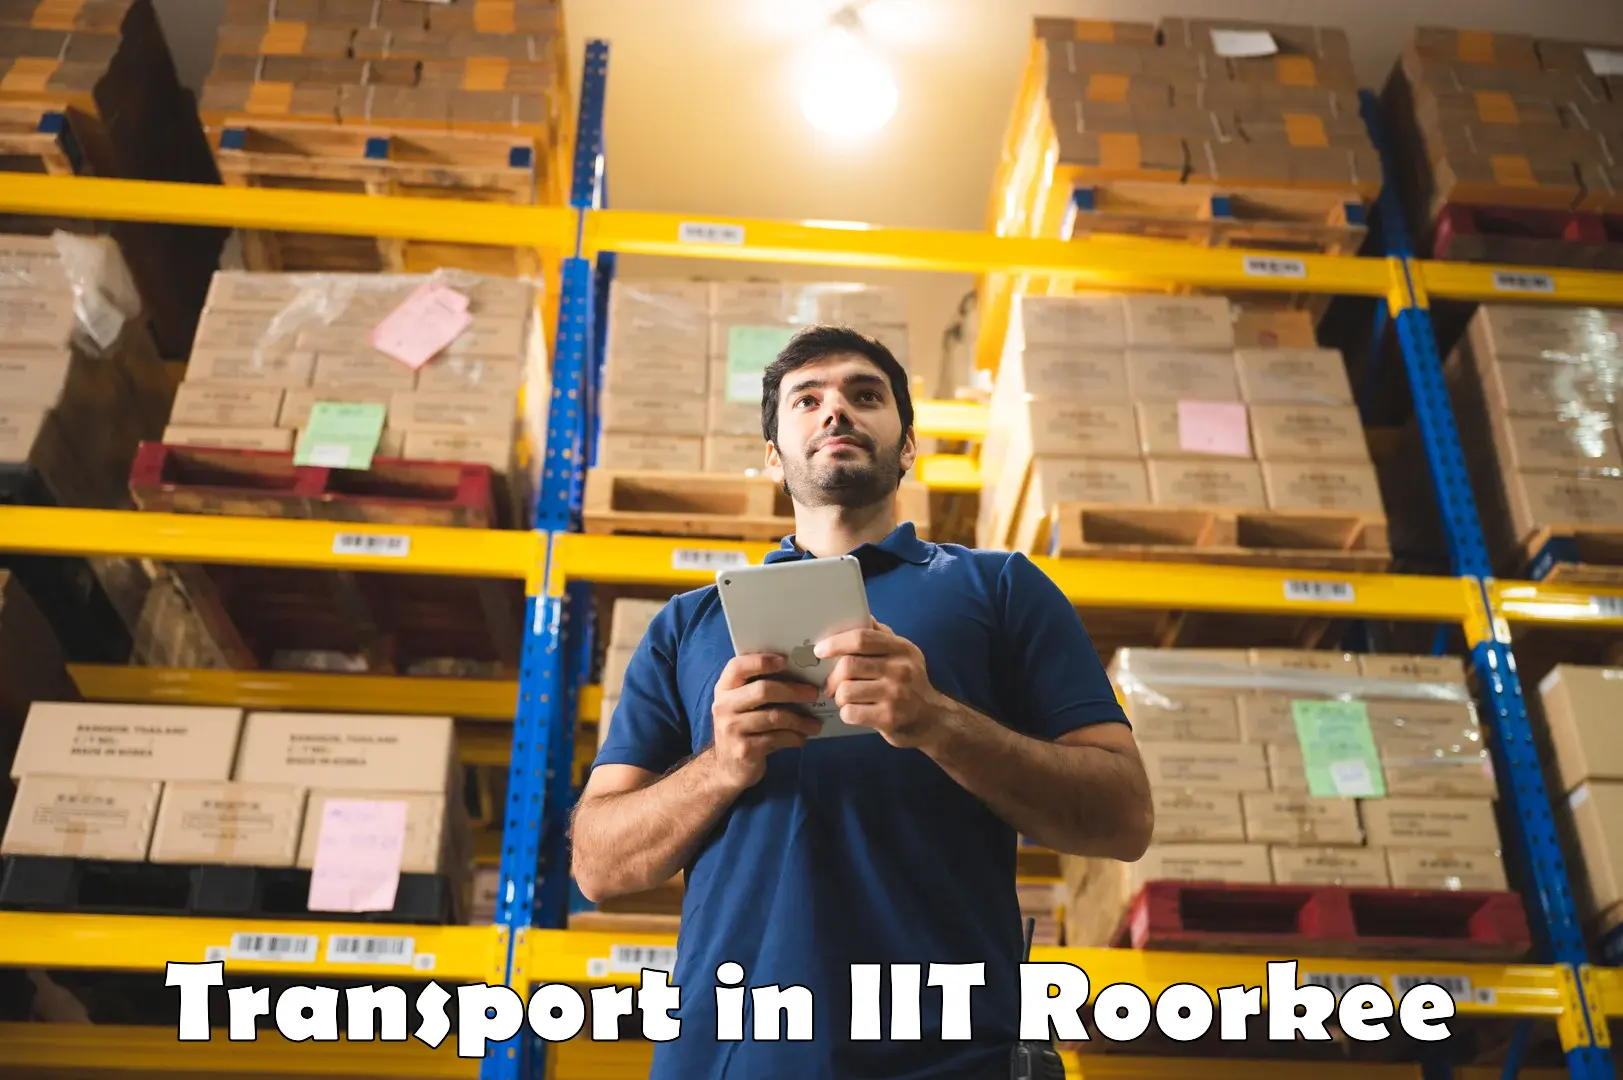 Transport shared services in IIT Roorkee